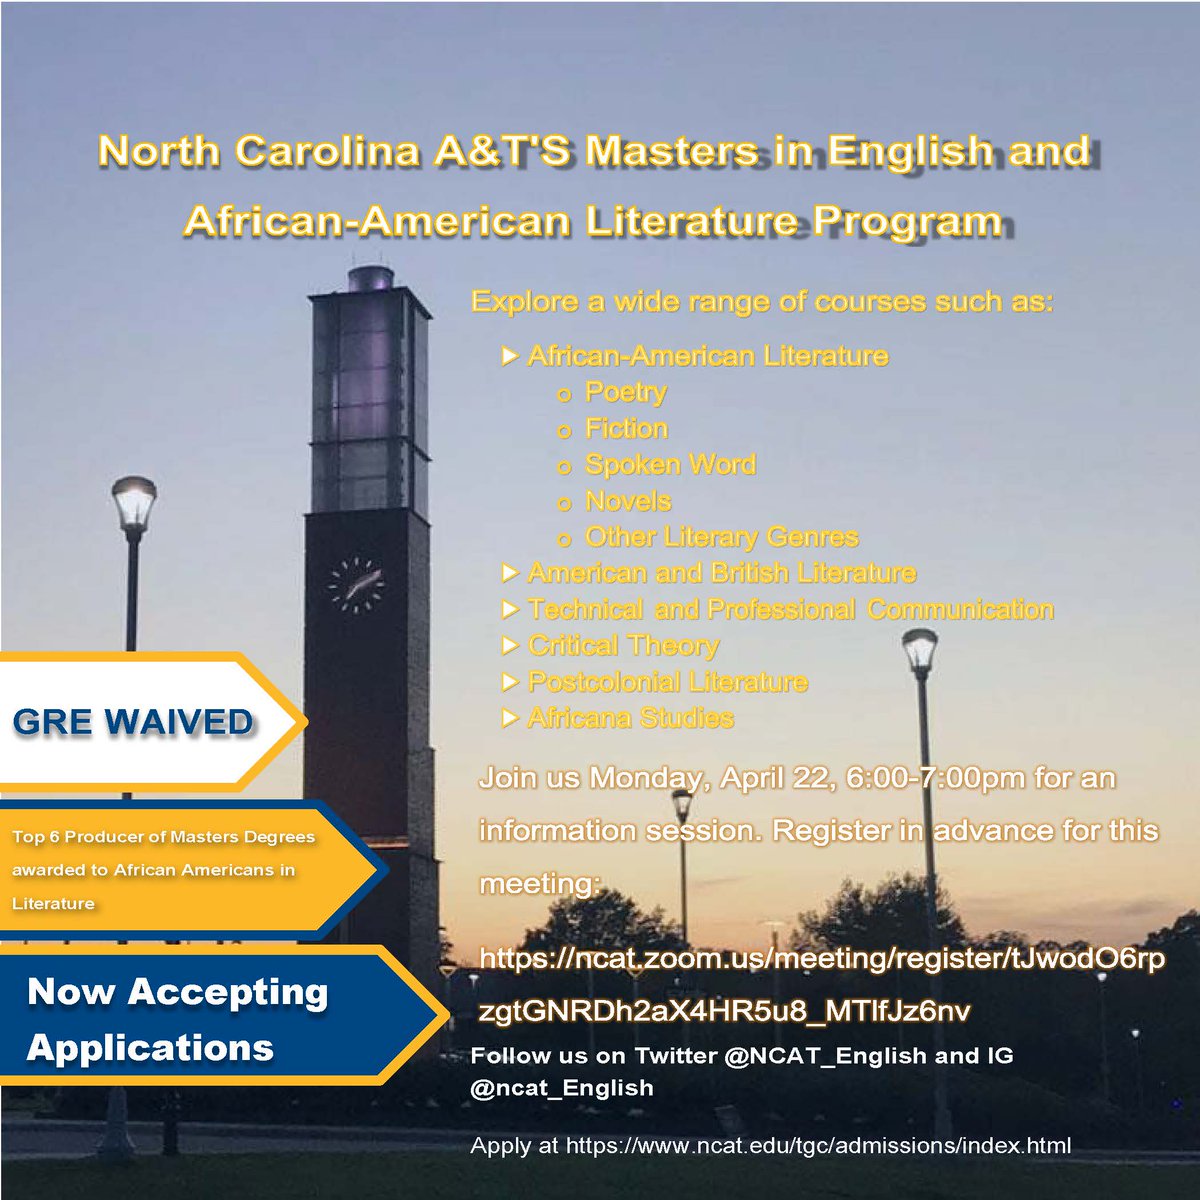 There's still time to attend! Register today! Register in advance for this meeting:
ncat.zoom.us/meeting/regist…

After registering, you will receive a confirmation email. @CAU @NCCU #ncat24 #ncat25 #ncat23 @NCATalumni @GCSchoolsNC @uncfsu @asurams @MorganStateU @CoppinStateUniv